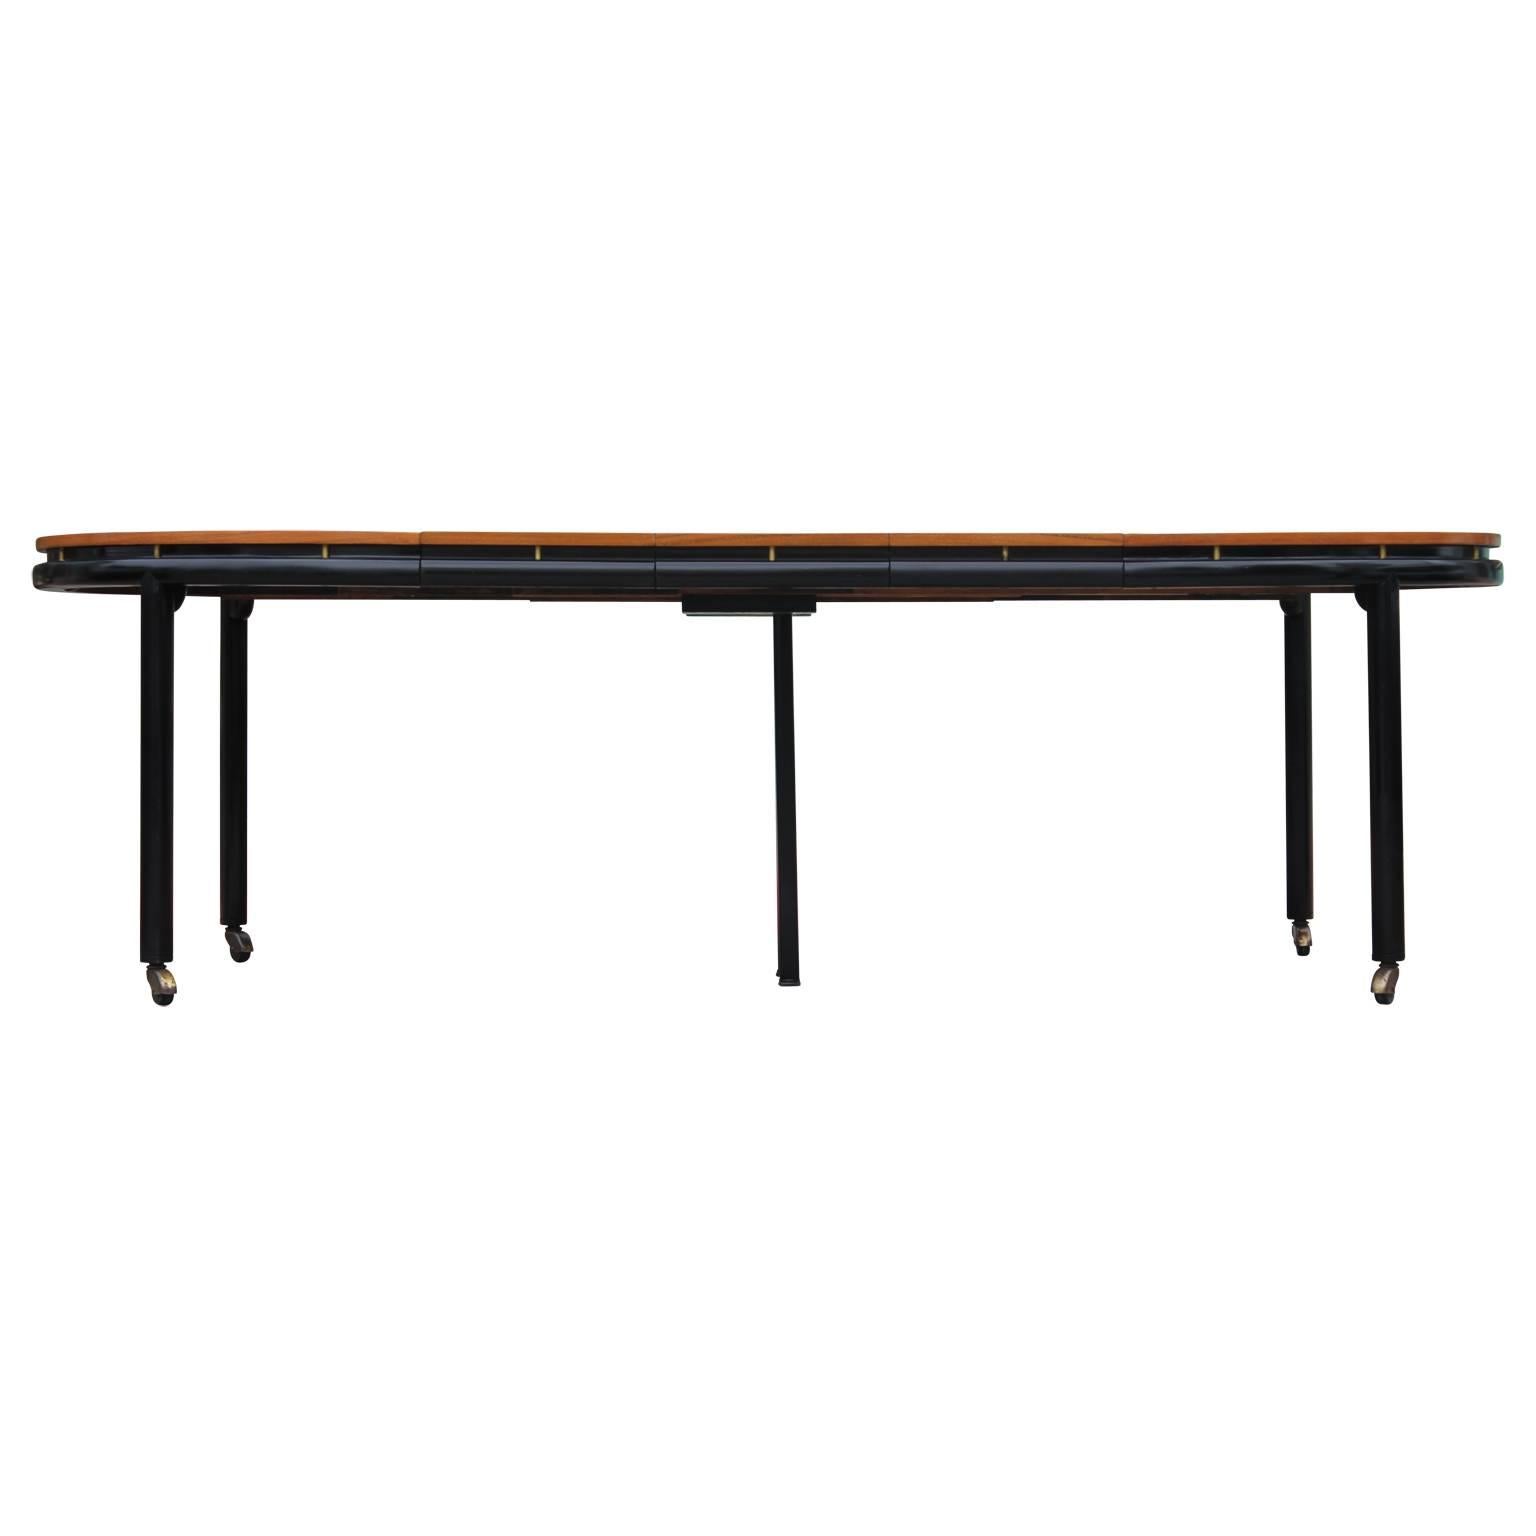 Gorgeous two-toned walnut dining table with three leaves by Michael Taylor for Baker Furniture New World Collection. With an ebonized finish on legs and brass castors. Measurements taken with all three leaves in place. Each leaf is 14 inches wide.